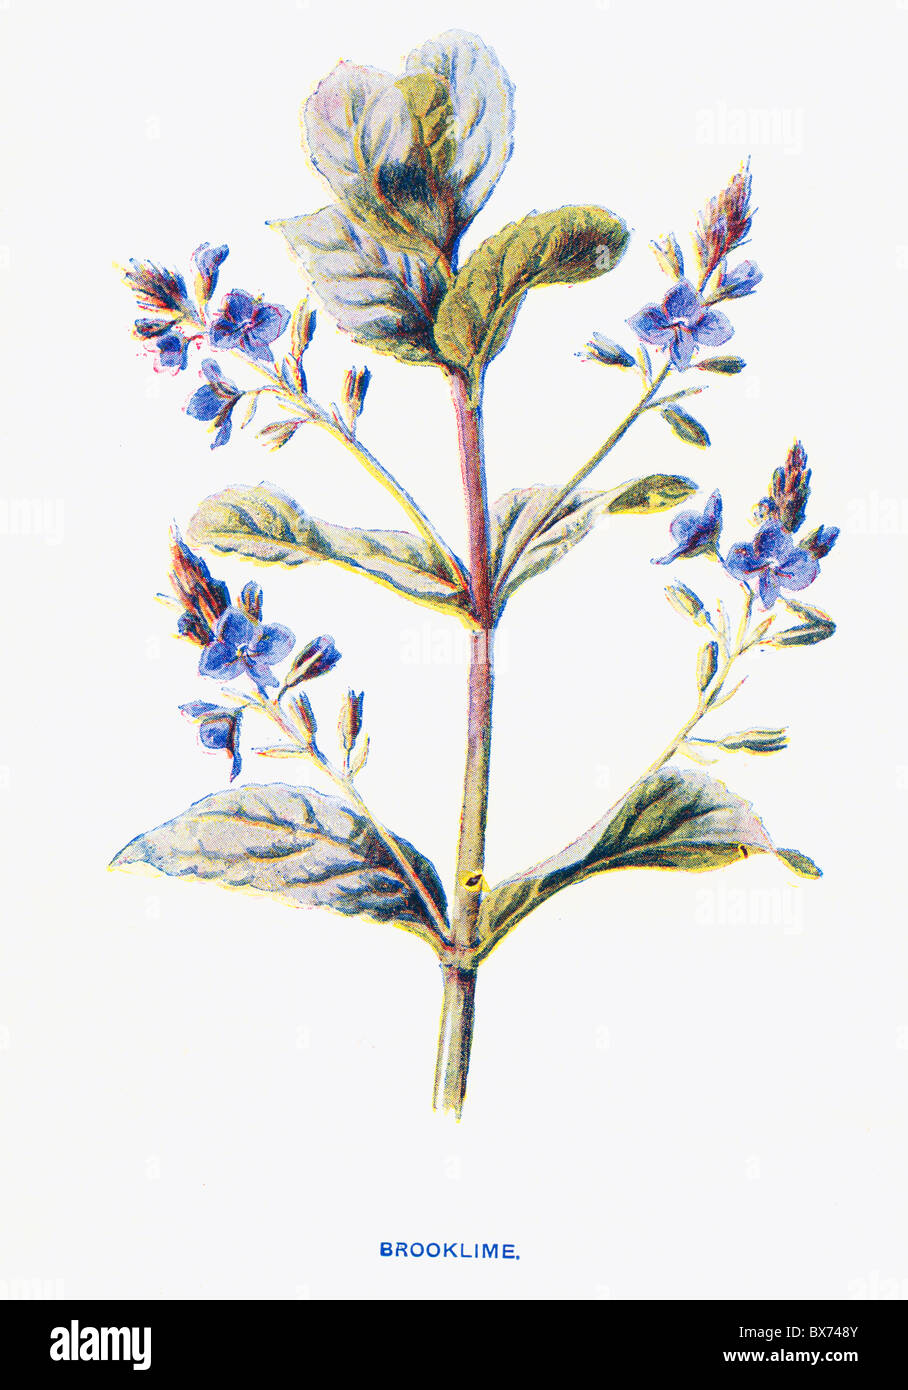 Brooklime (Veronica beccabunga) from Familiar Wild Flowers by F. Edward Hulme; Colour Lithograph Stock Photo